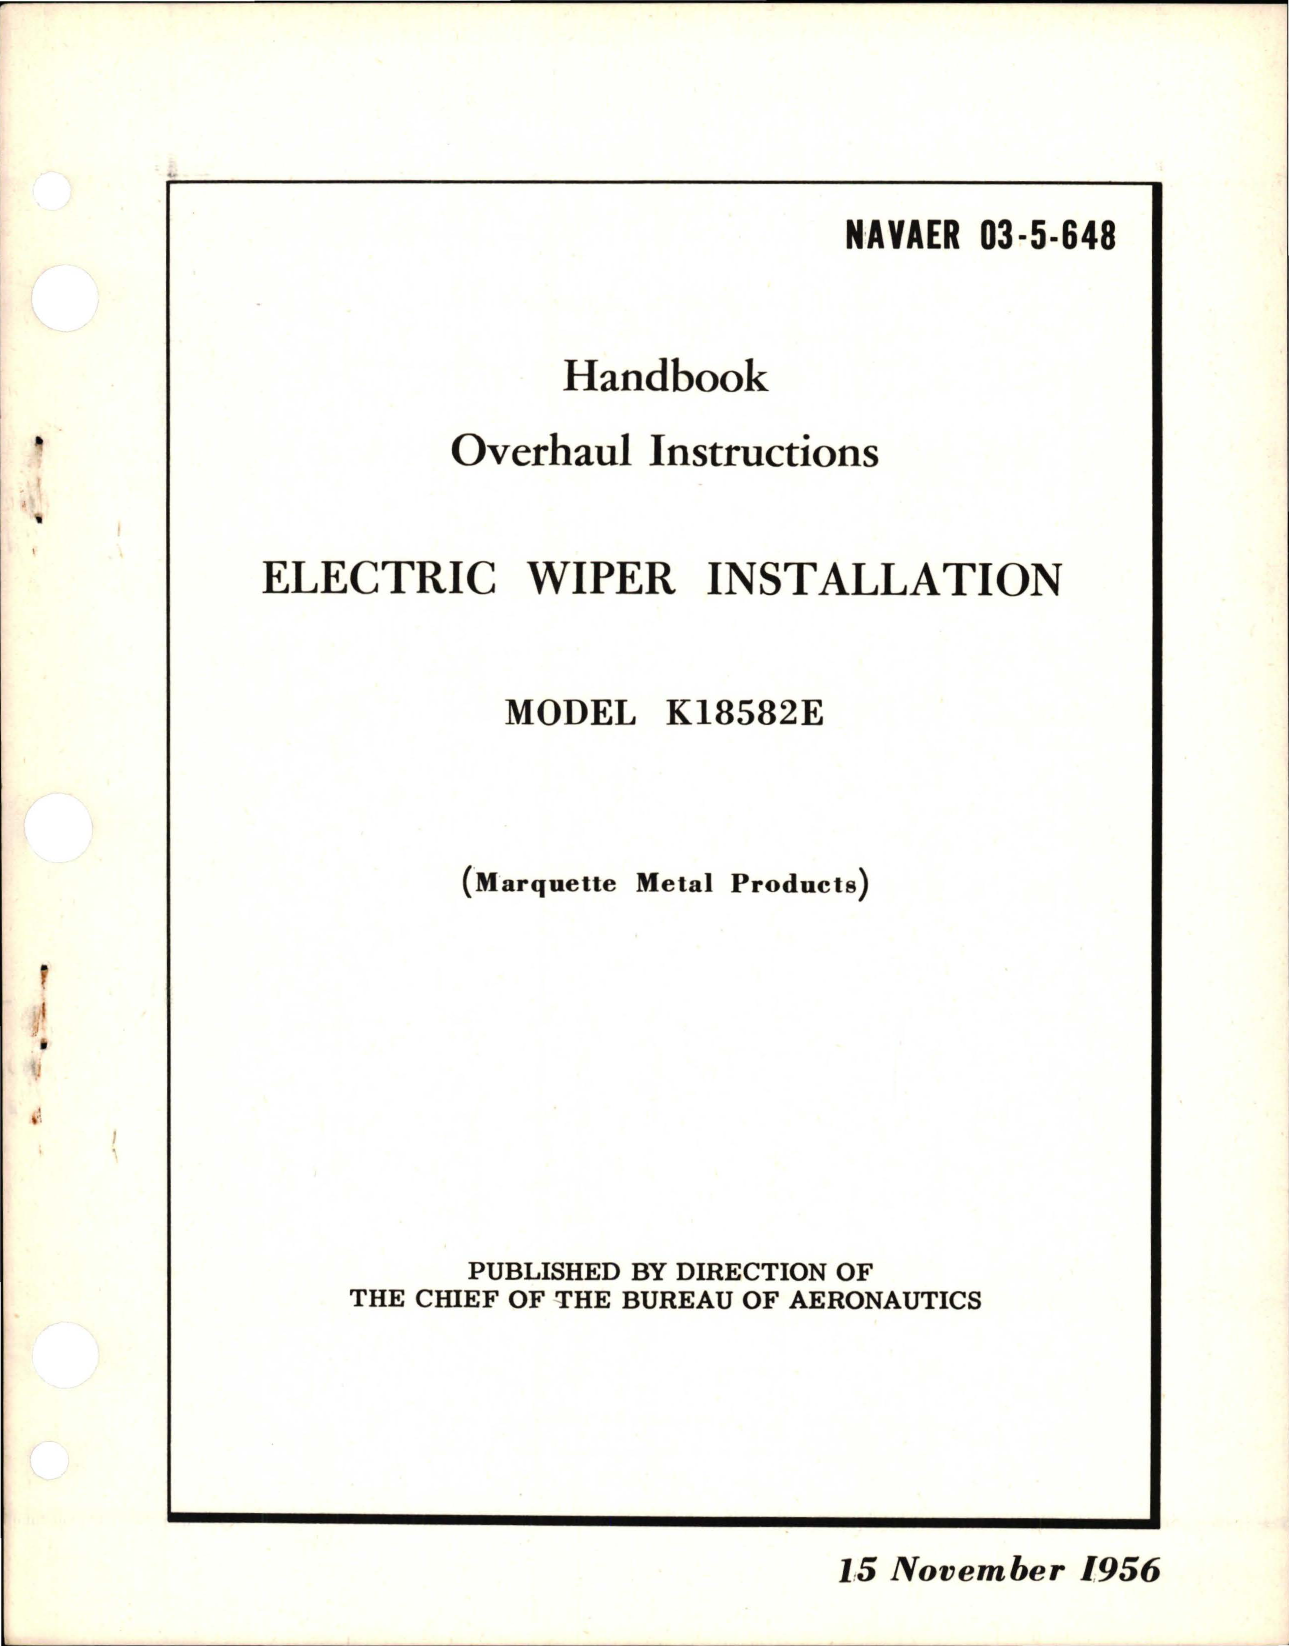 Sample page 1 from AirCorps Library document: Overhaul Instructions for Electric Wiper Installation - Model K18582E 